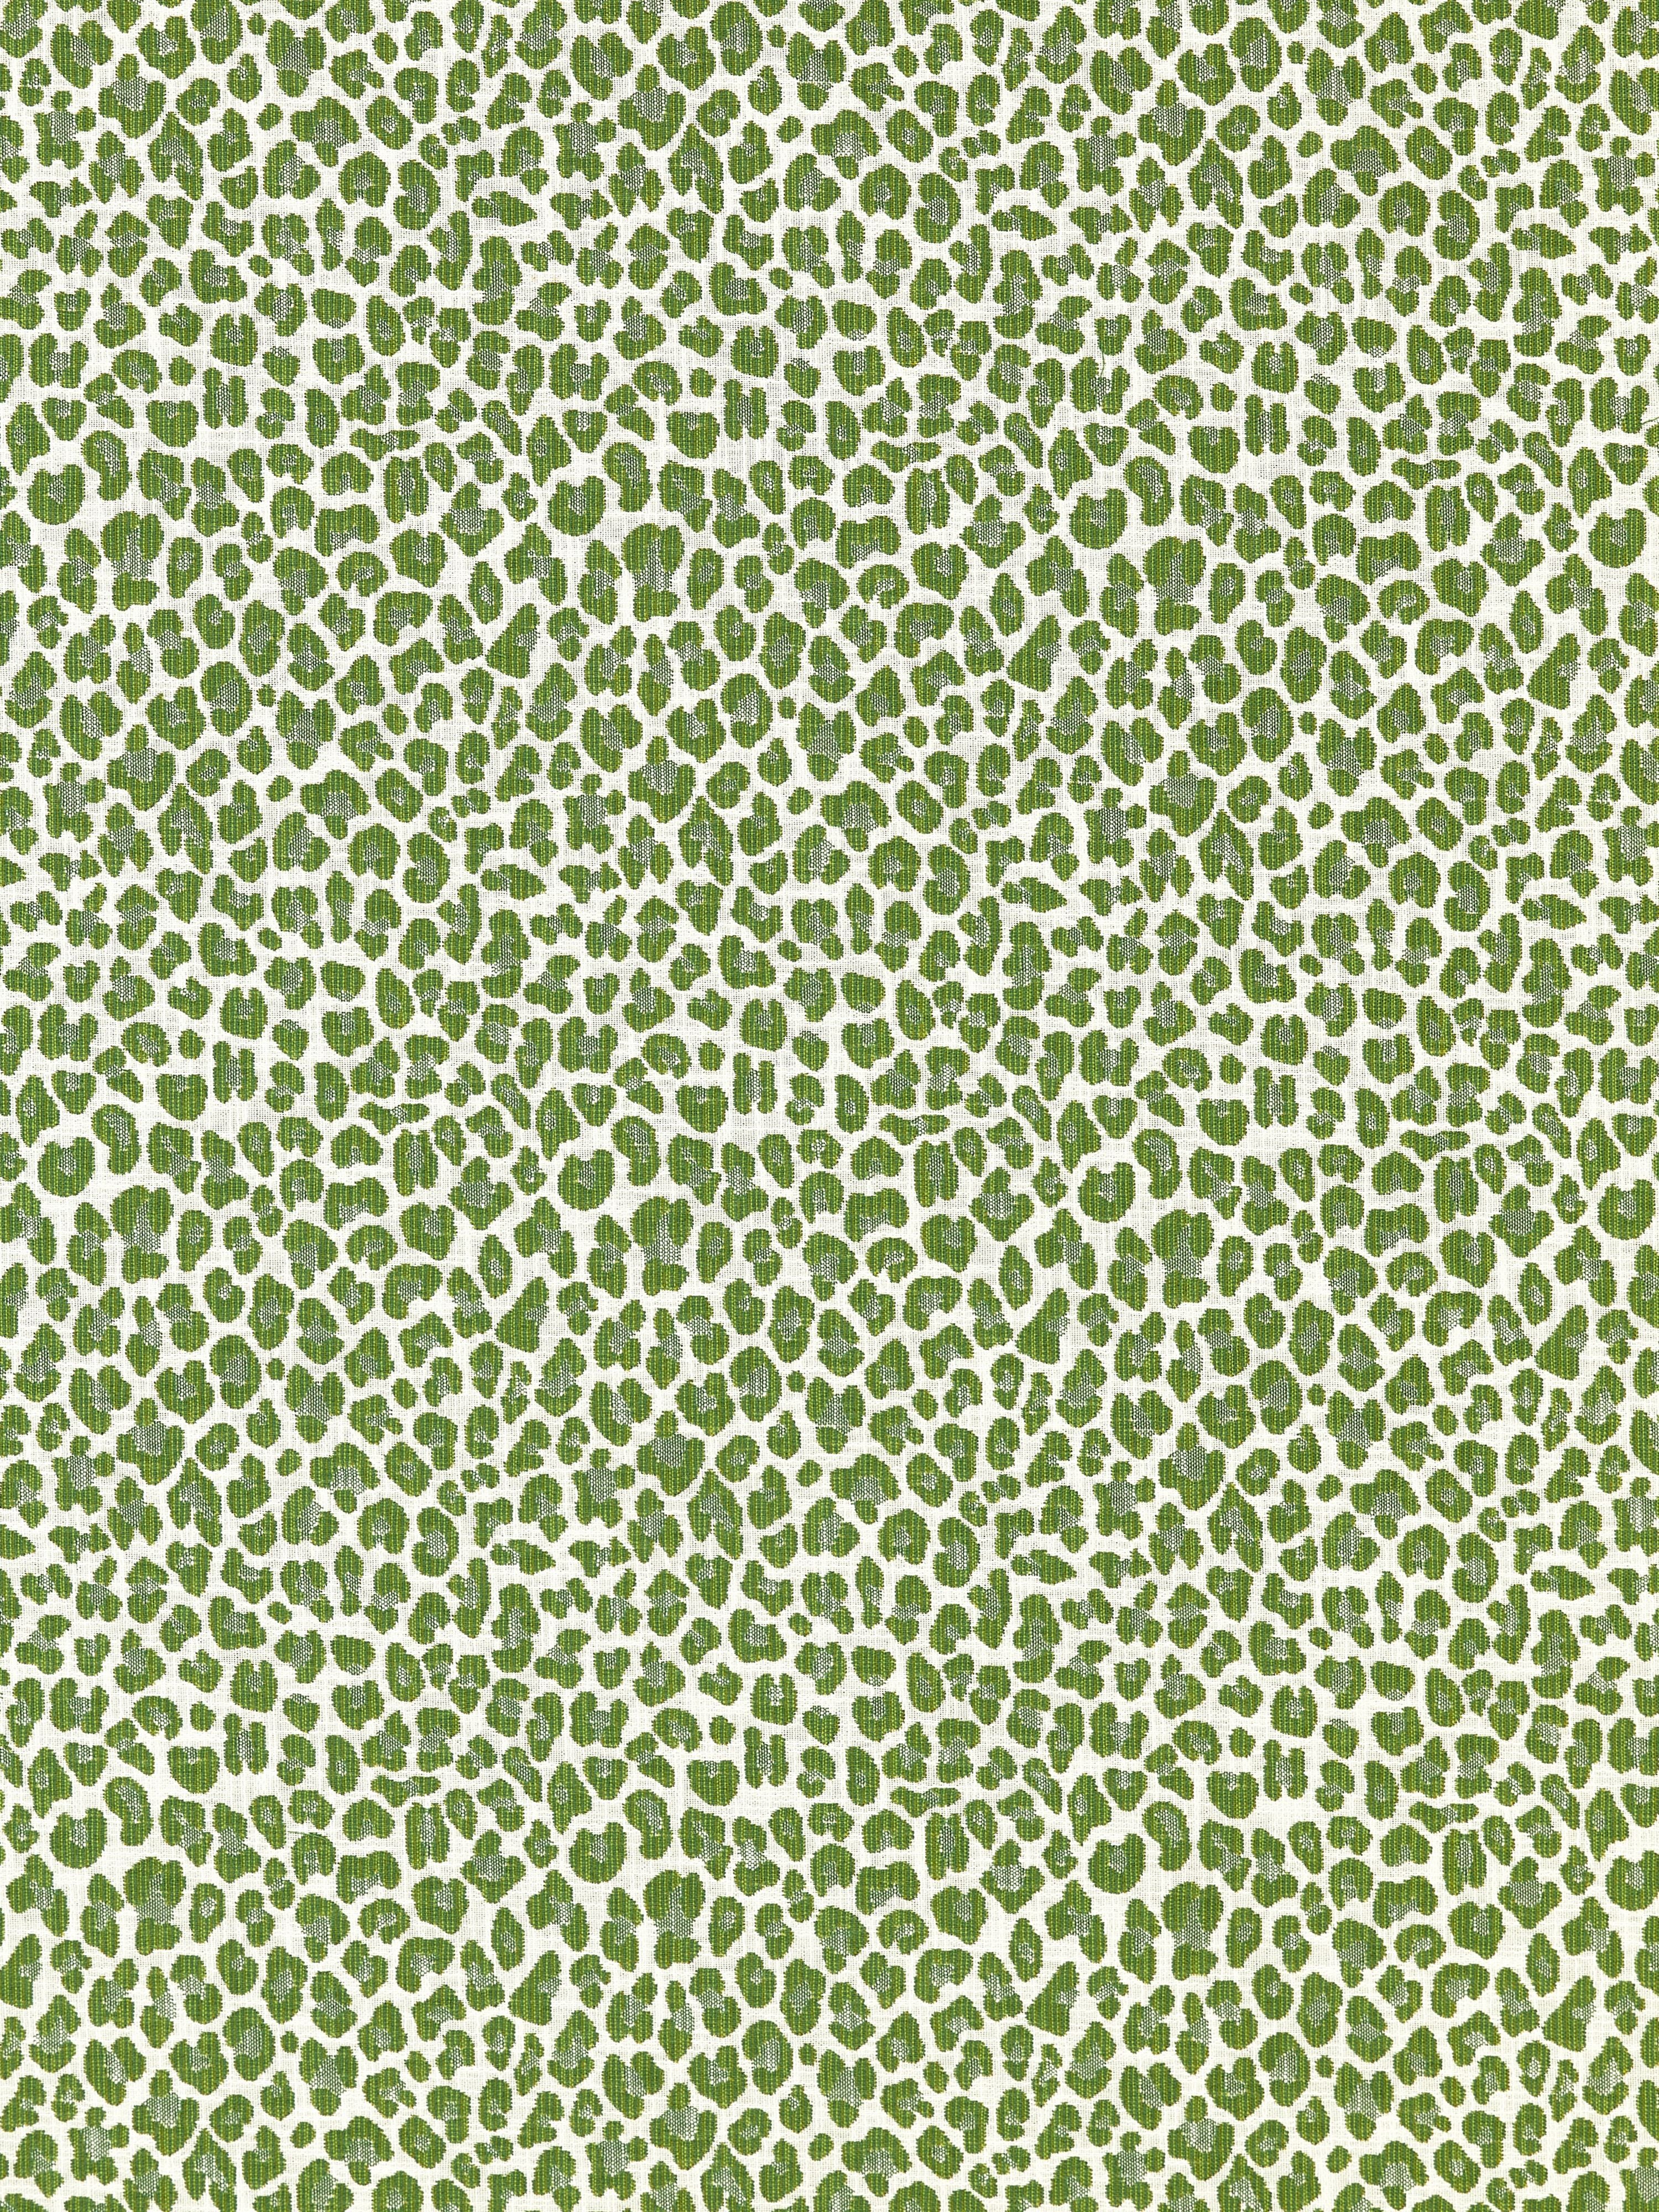 Backyard Bengal fabric in ivy color - pattern number SC 000327316 - by Scalamandre in the Scalamandre Fabrics Book 1 collection